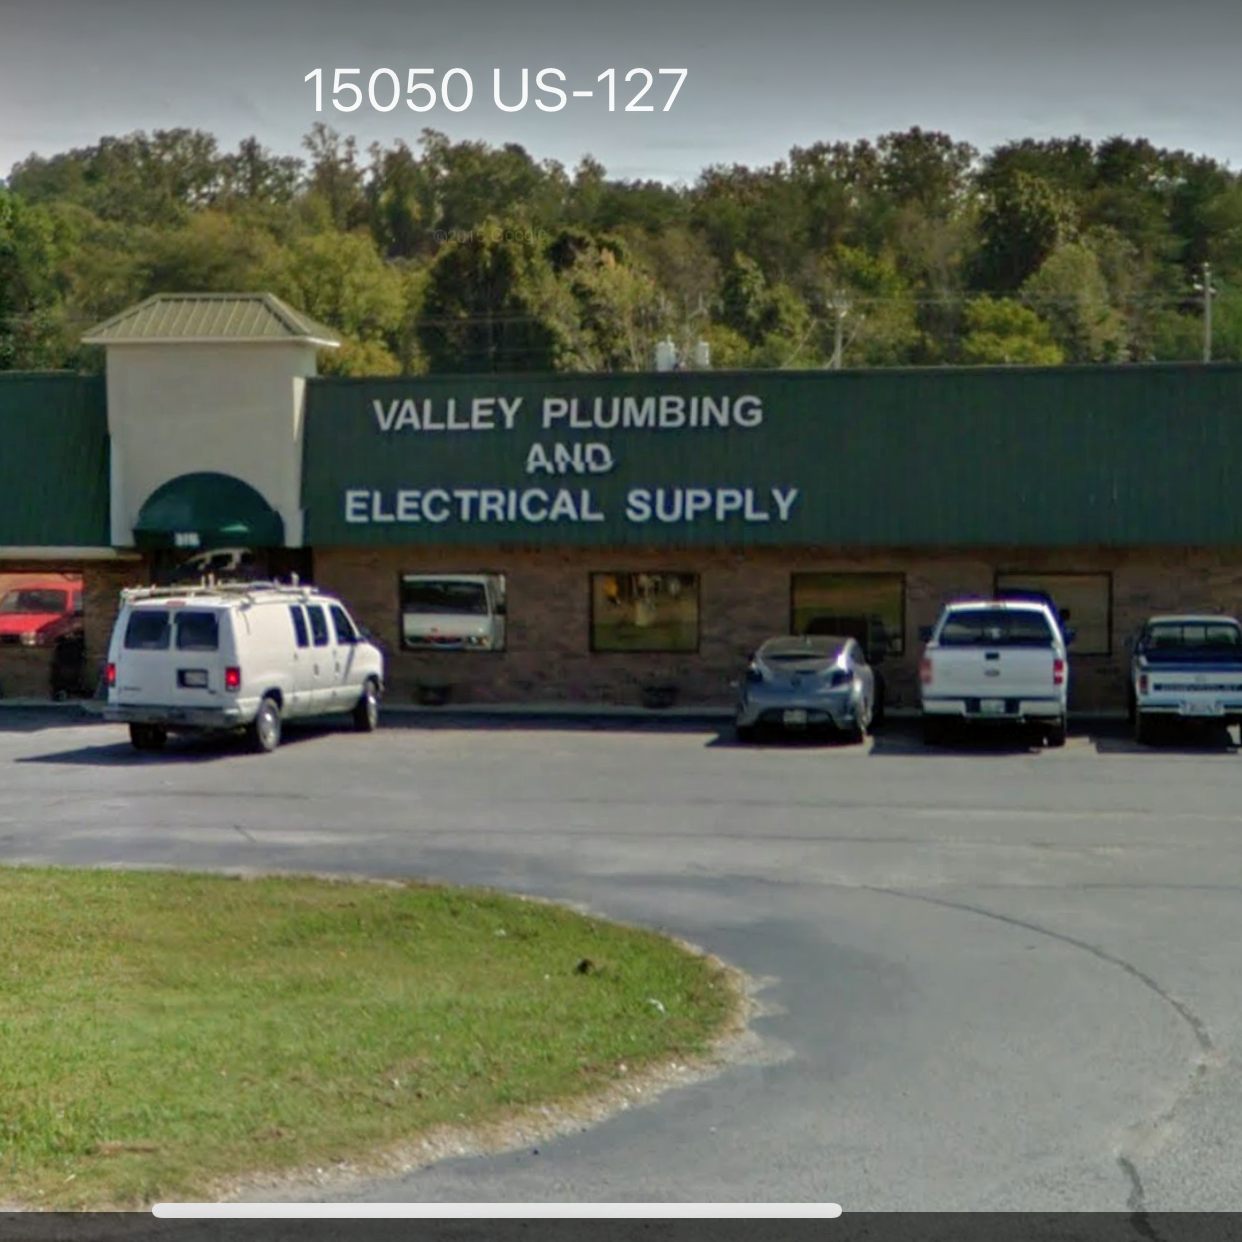 Valley Plumbing & Electric 15050 Rankin Ave, Dunlap Tennessee 37327